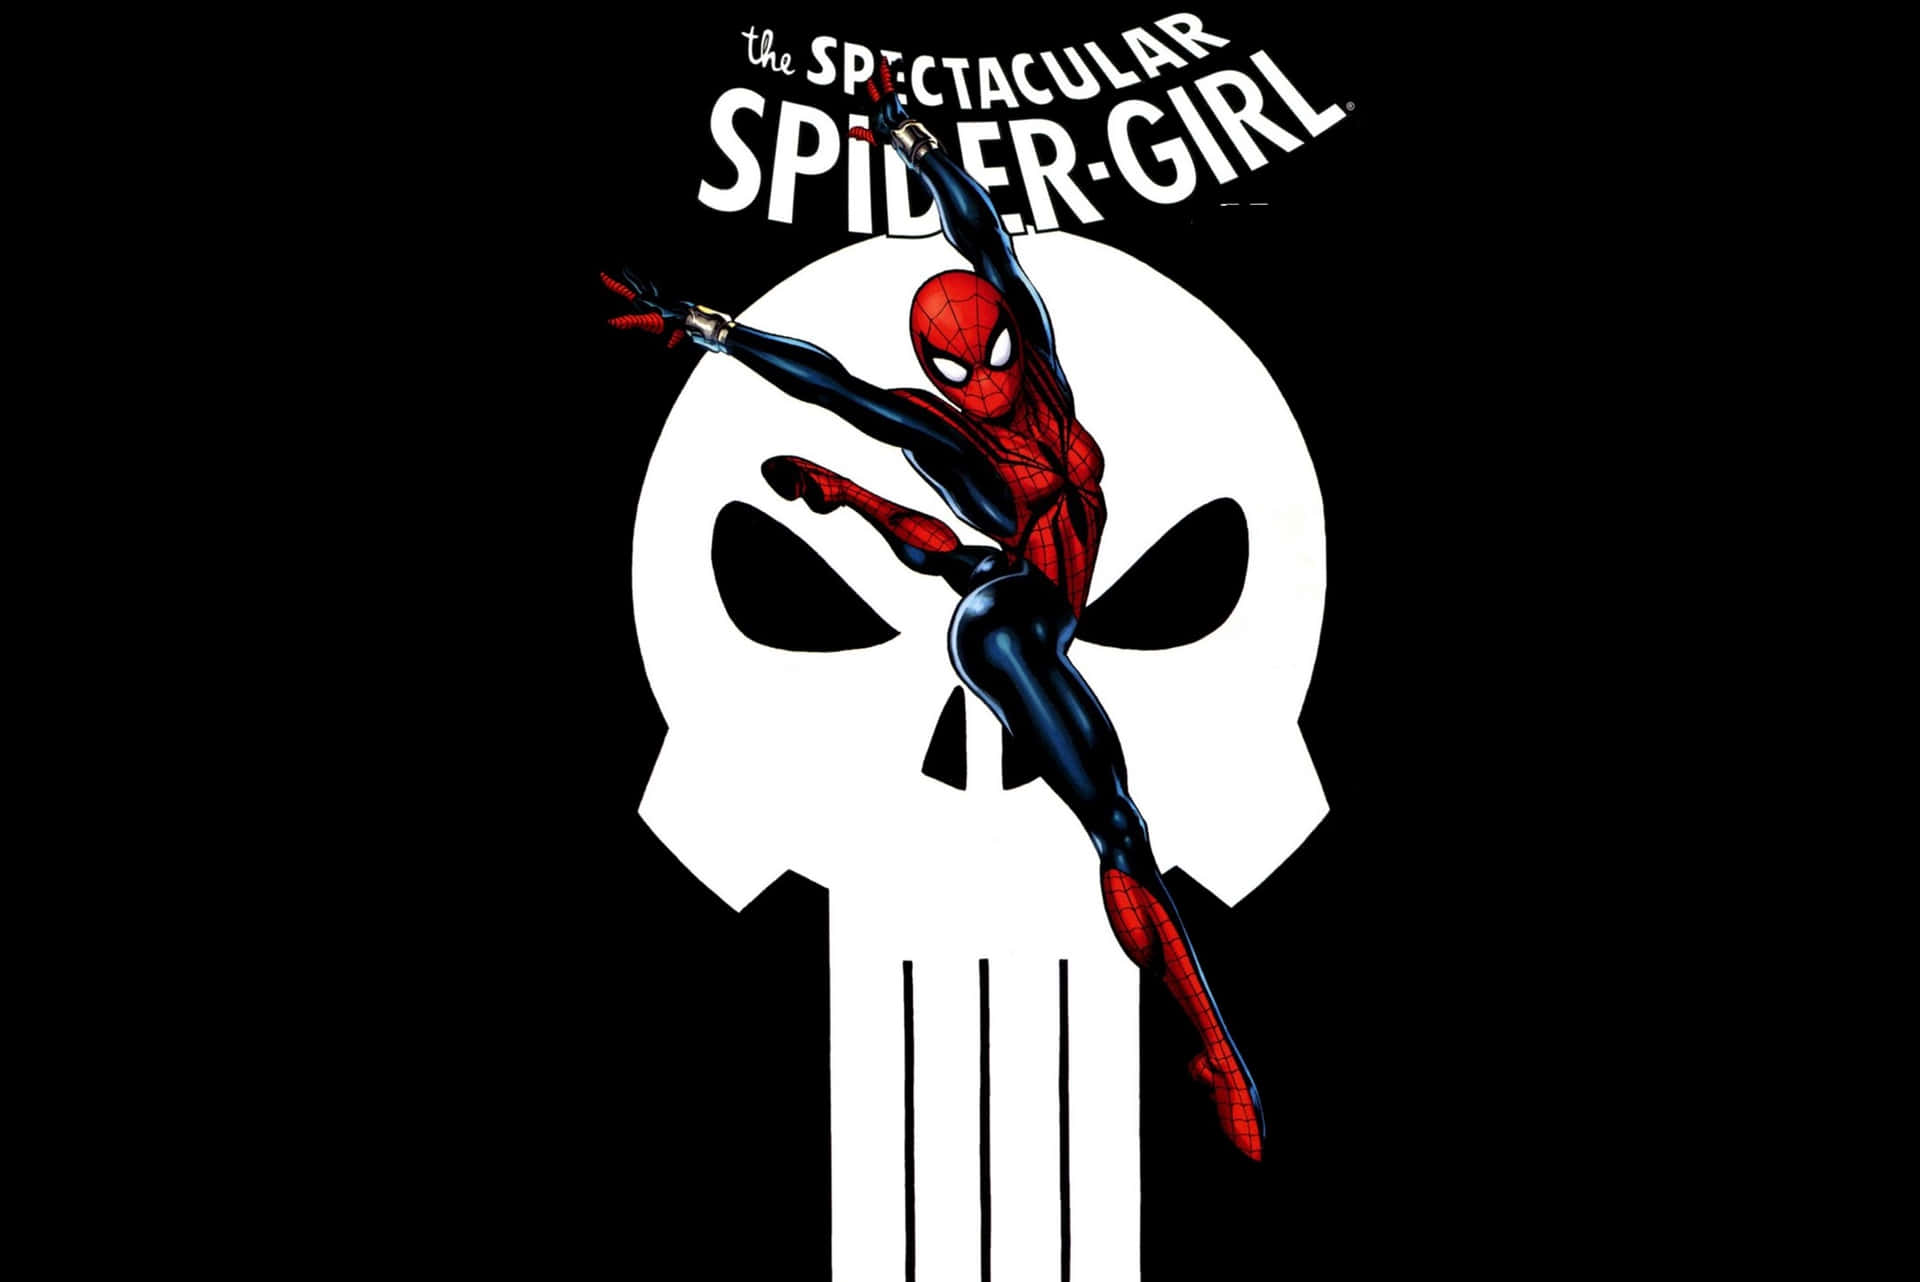 Caption: The Spectacular Spider-man In Action Wallpaper